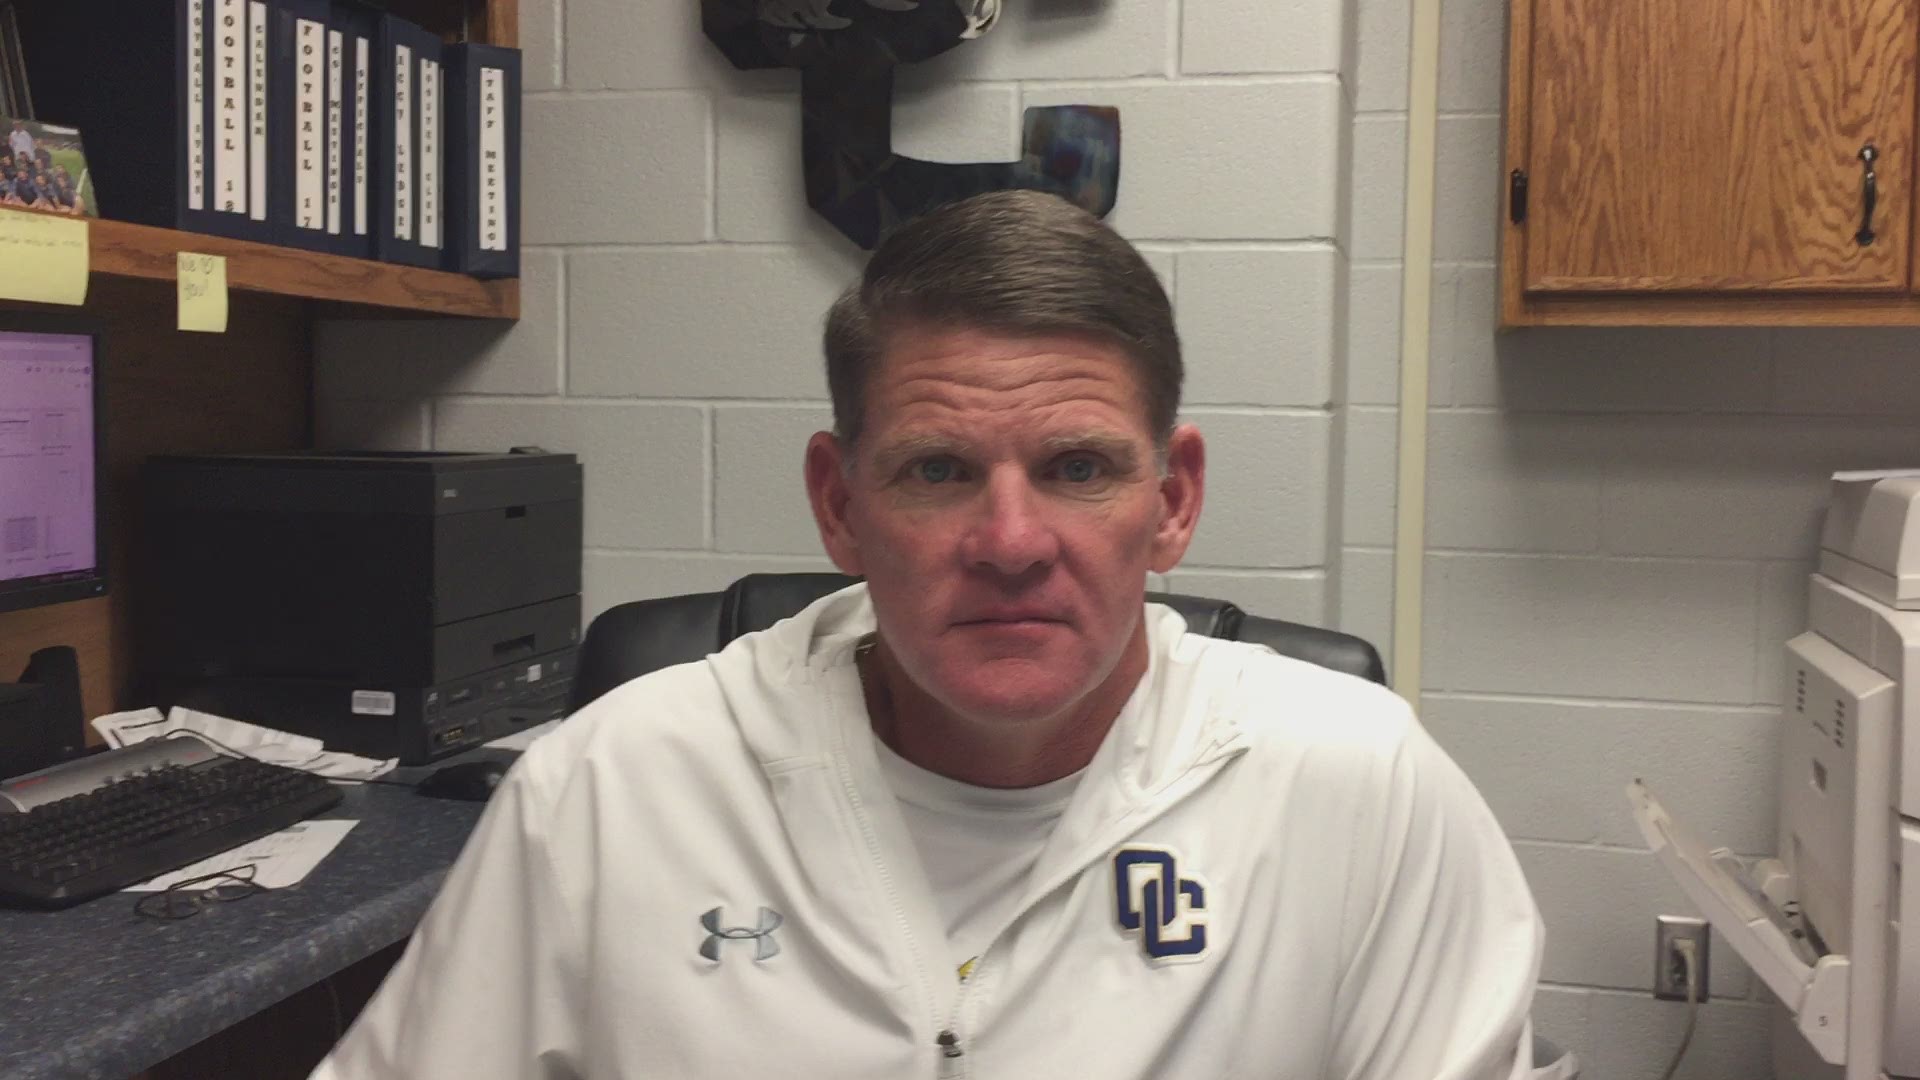 O'Connor coach David Malesky on Friday night's matchup with Brandeis